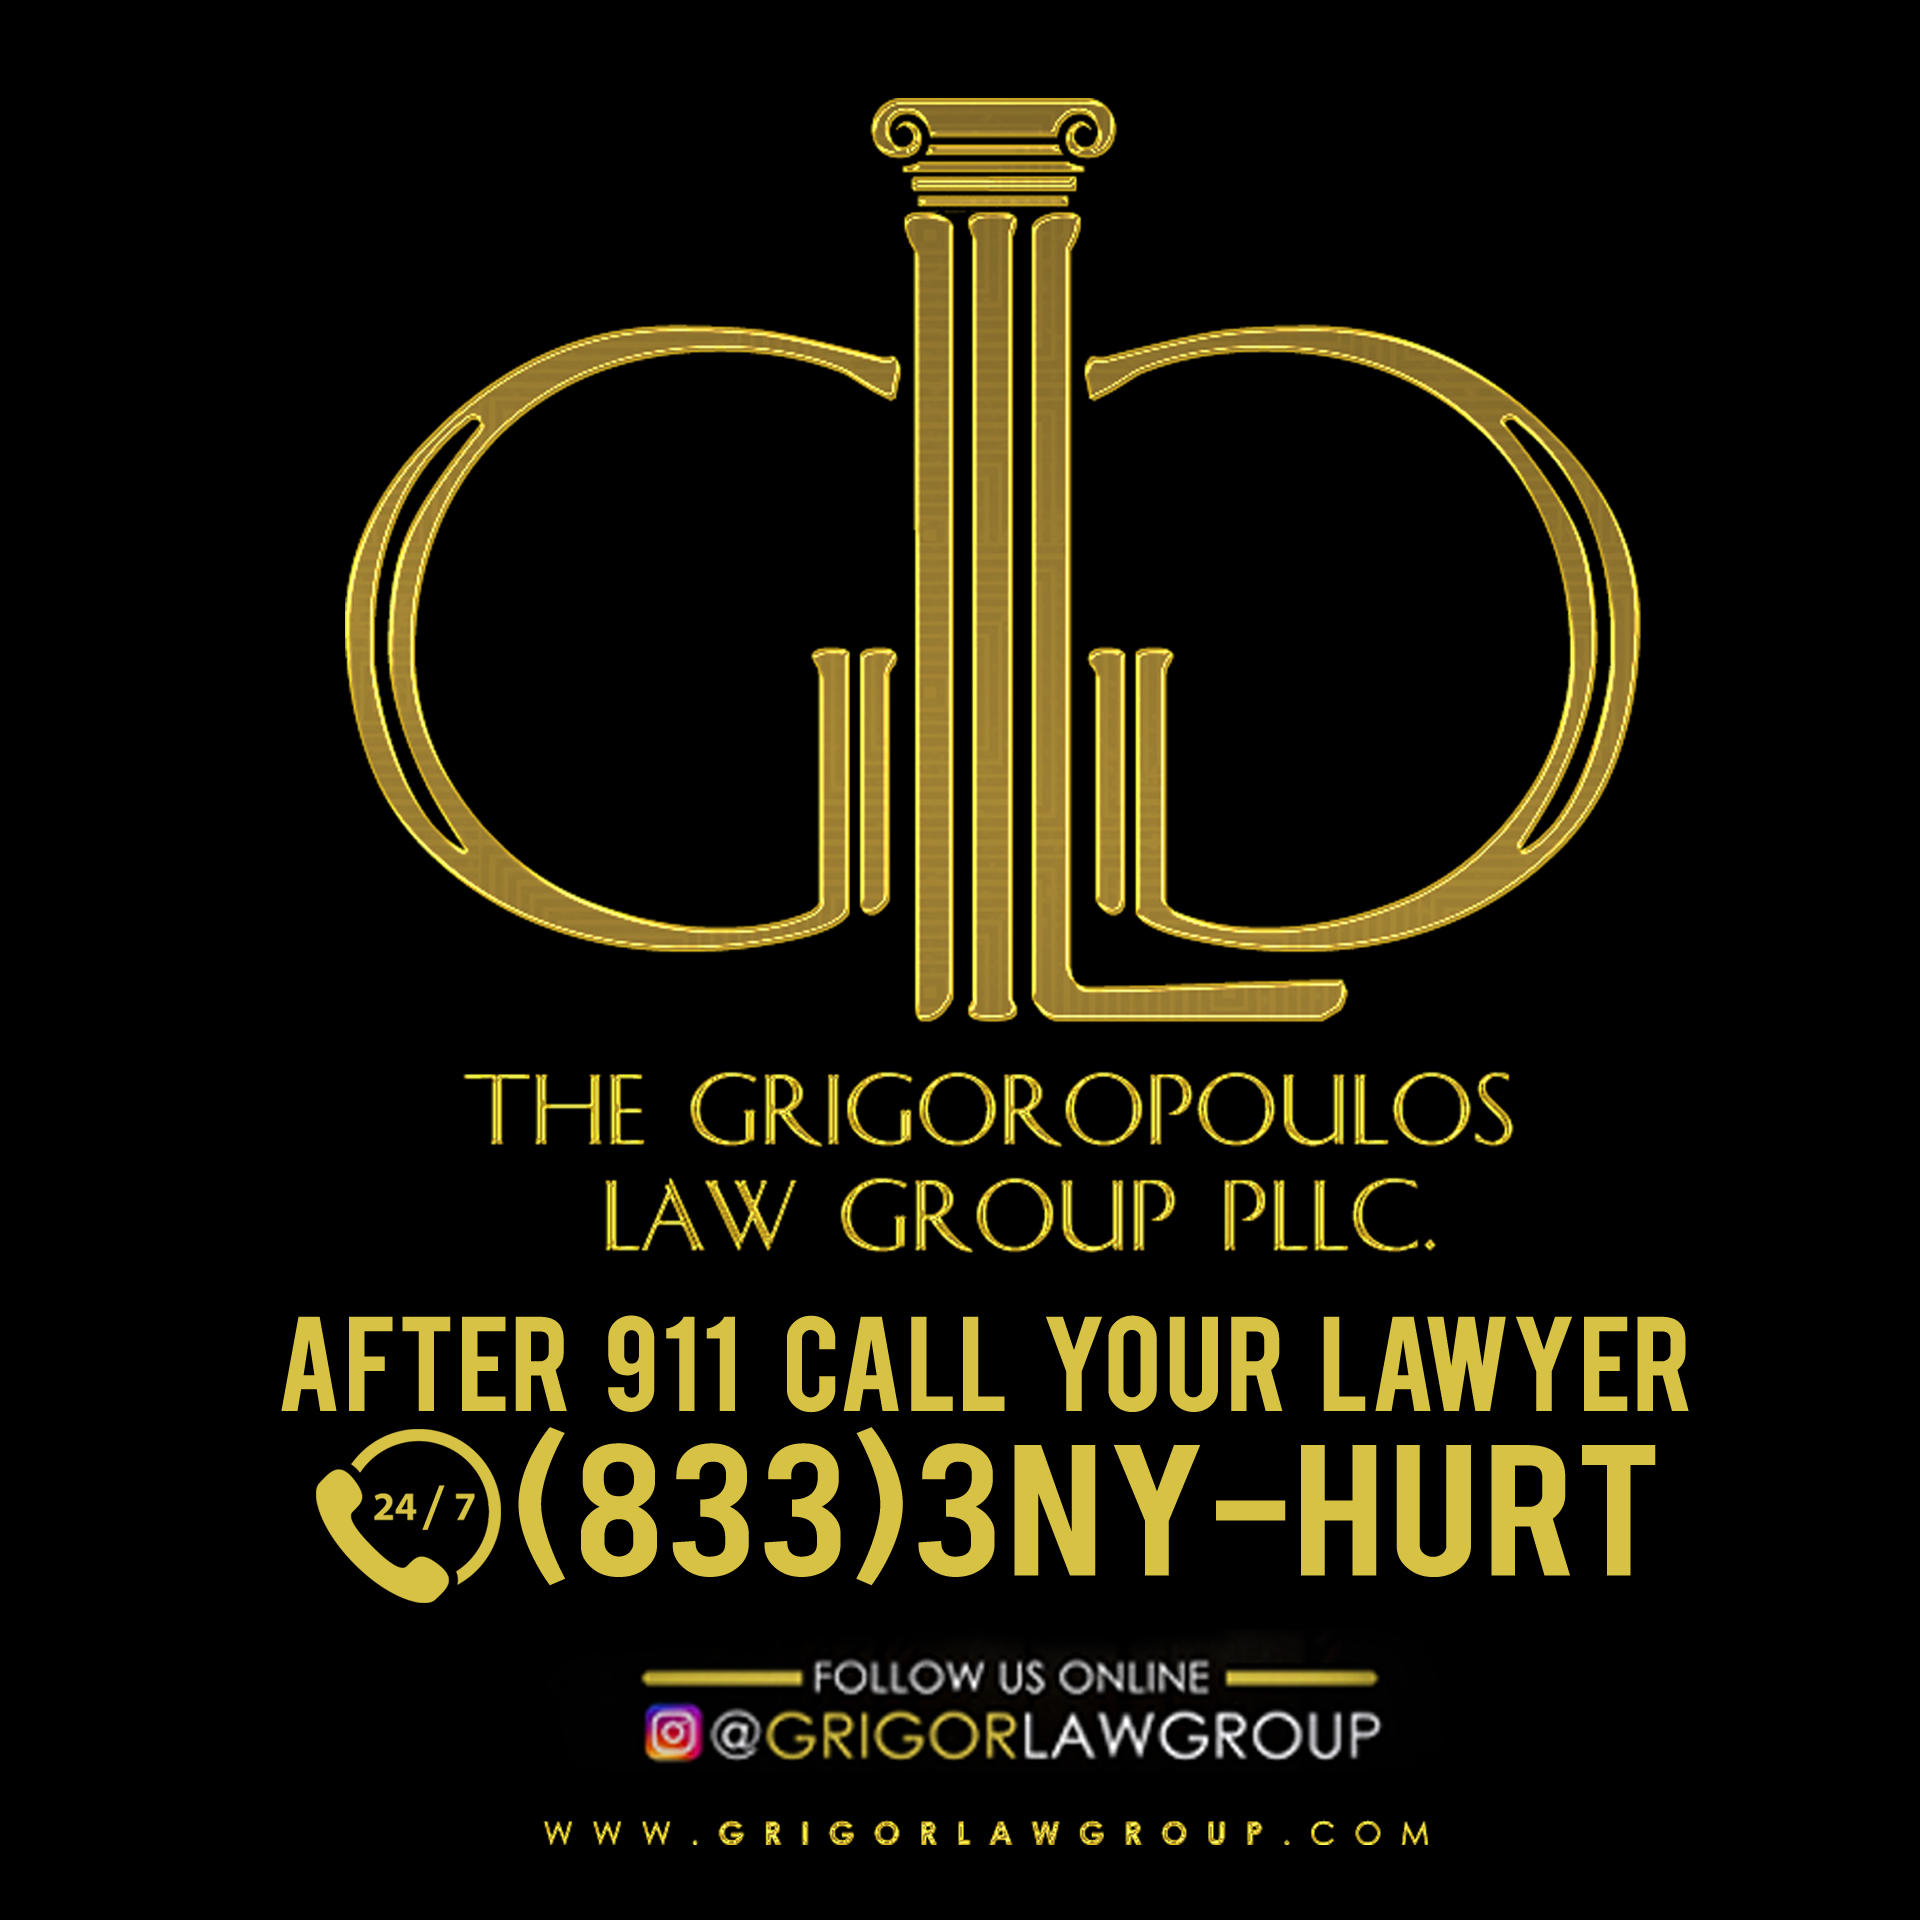 The Grigoropoulos Law Group Ridgewood (718)249-7447